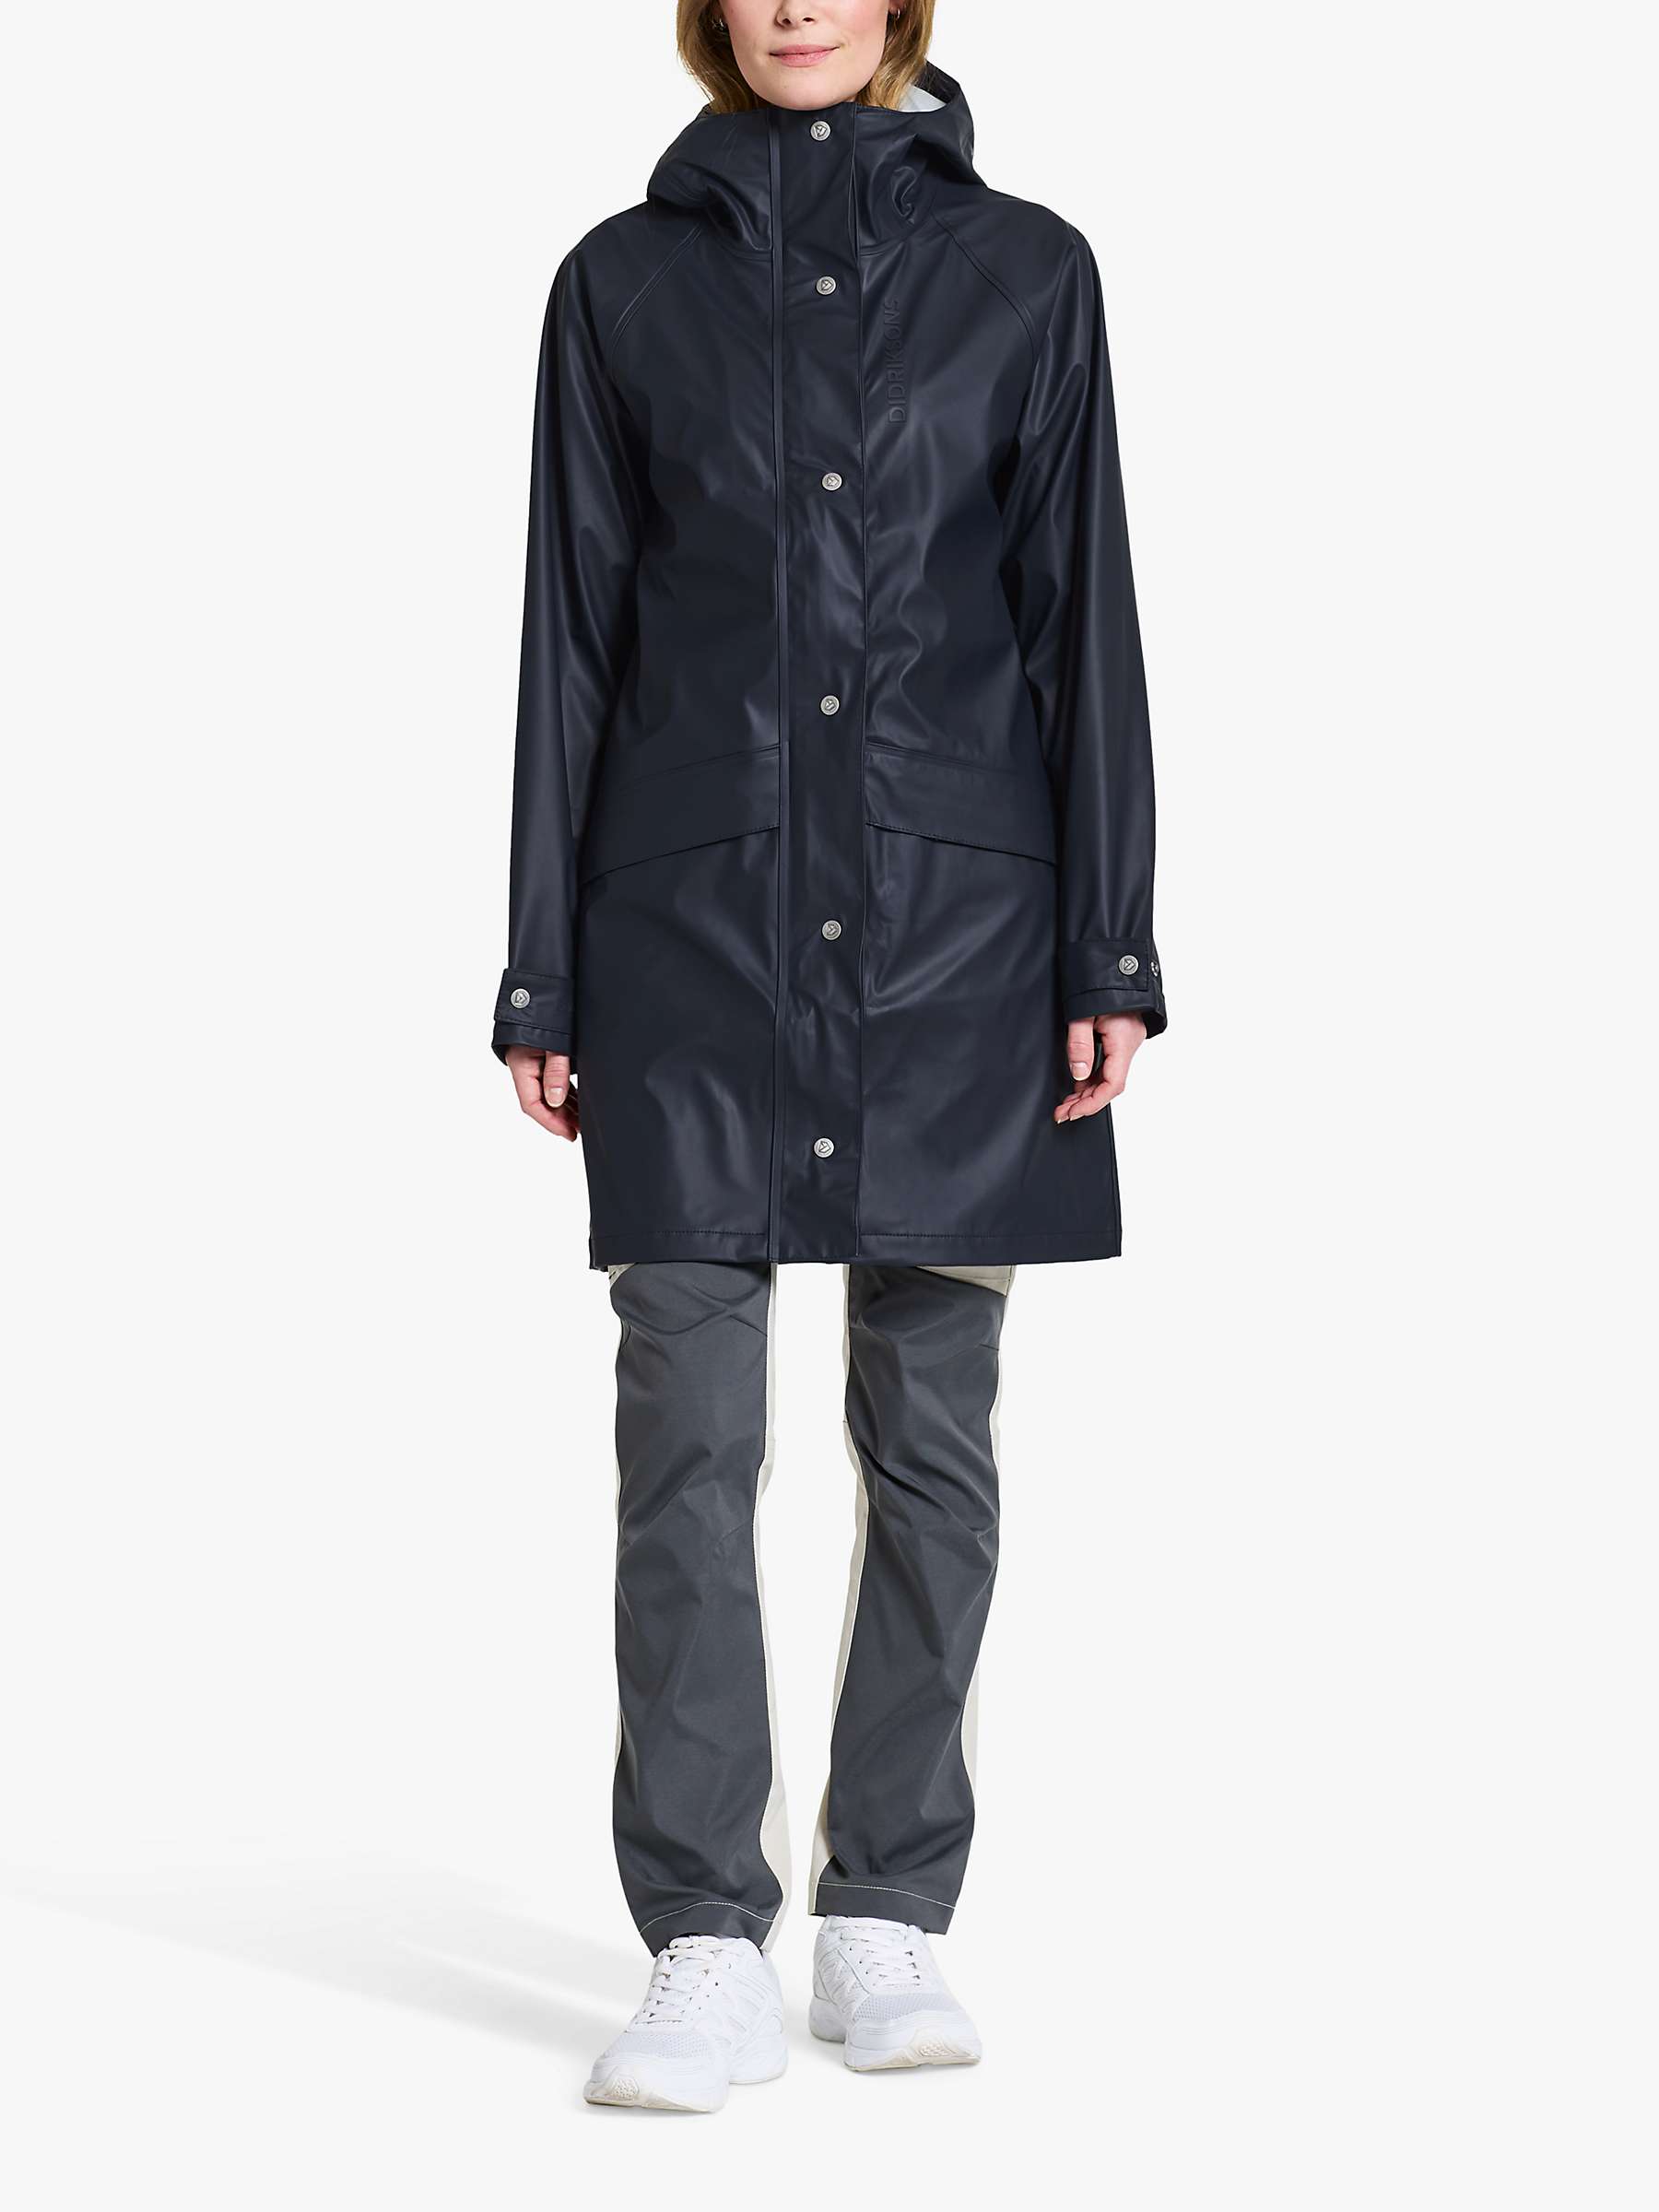 Buy Didriksons Ellywn Straight Fit Parka Online at johnlewis.com